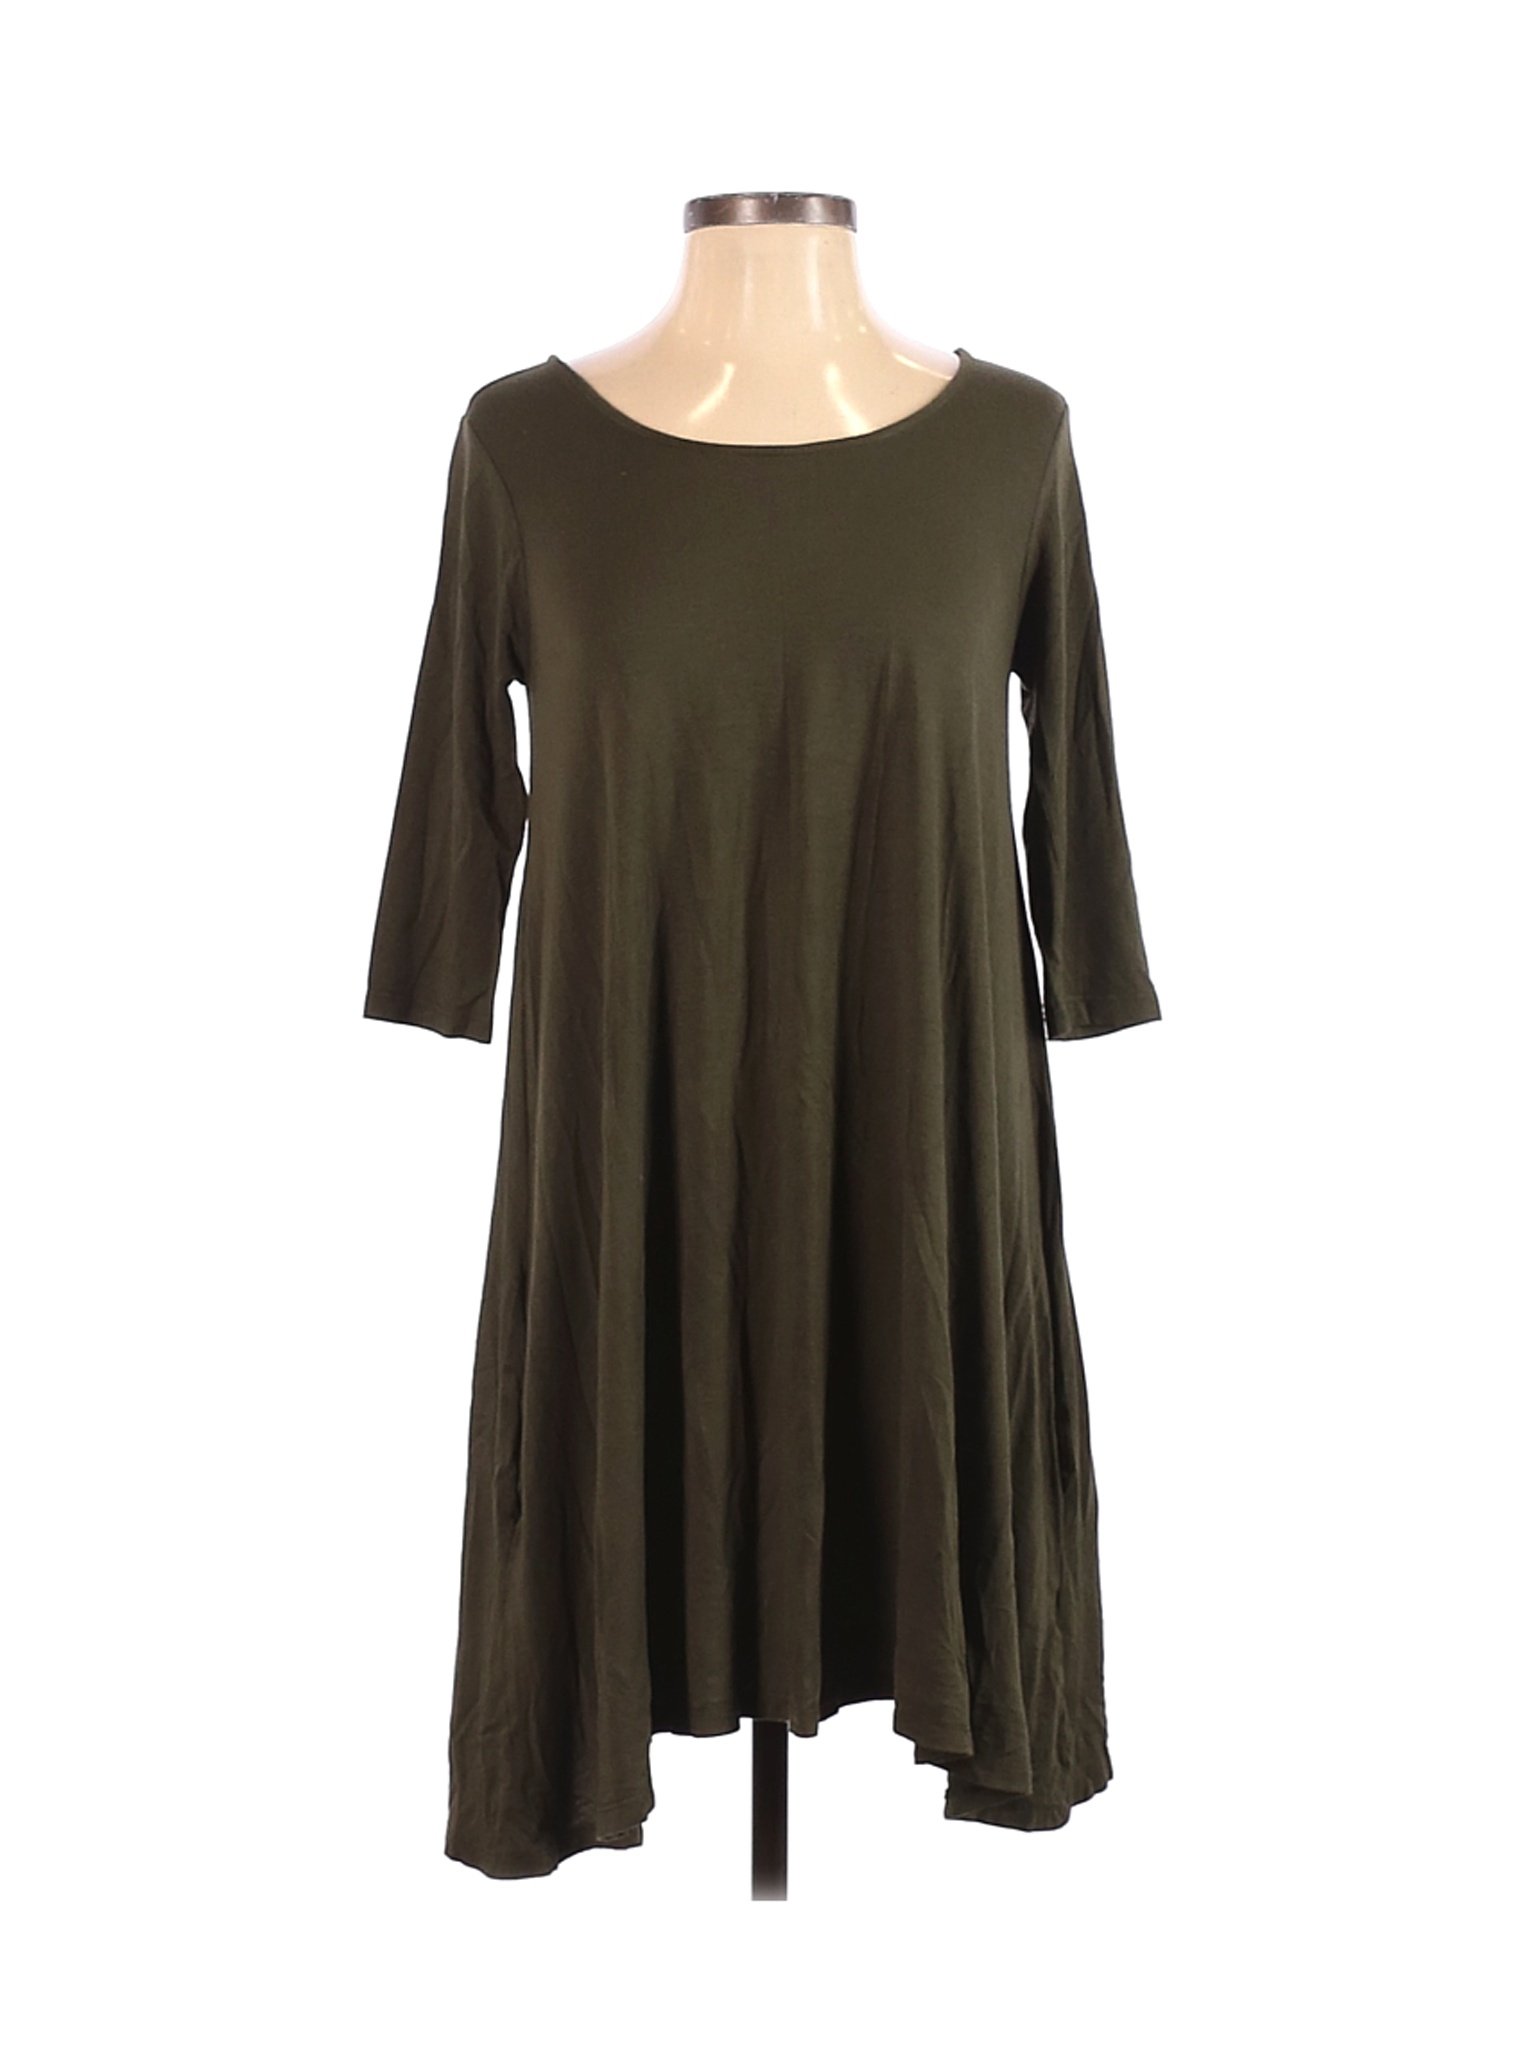 Rags And Couture Women Green Casual Dress S | eBay